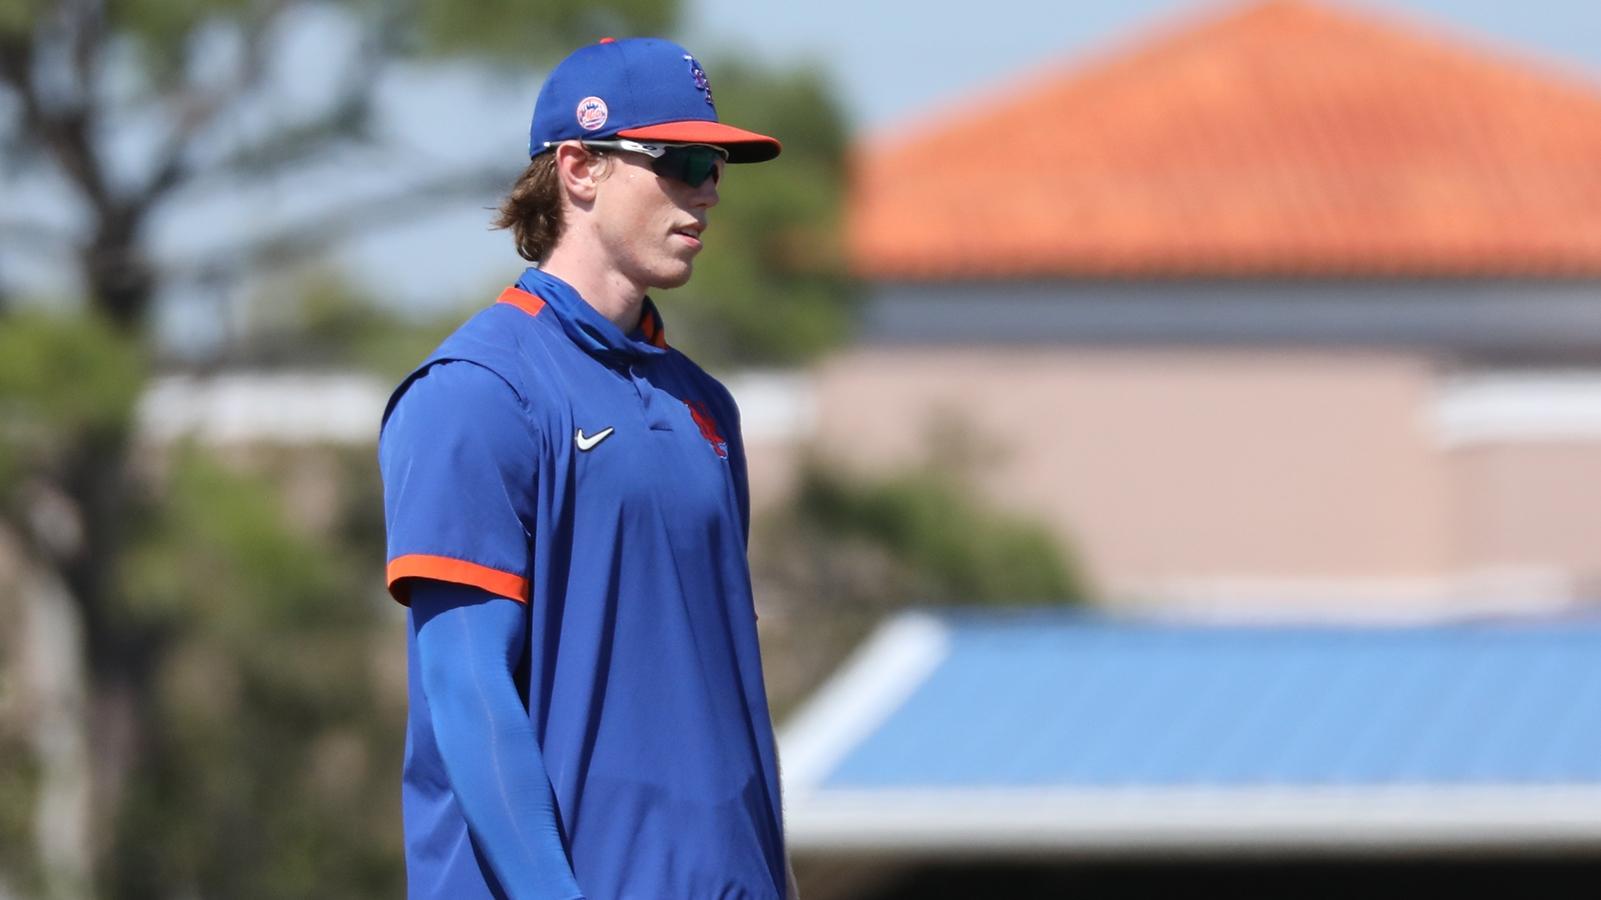 Mets prospect Brett Baty at 2021 spring training in Port St. Lucie, Fla. / Rob Carbuccia/SNY